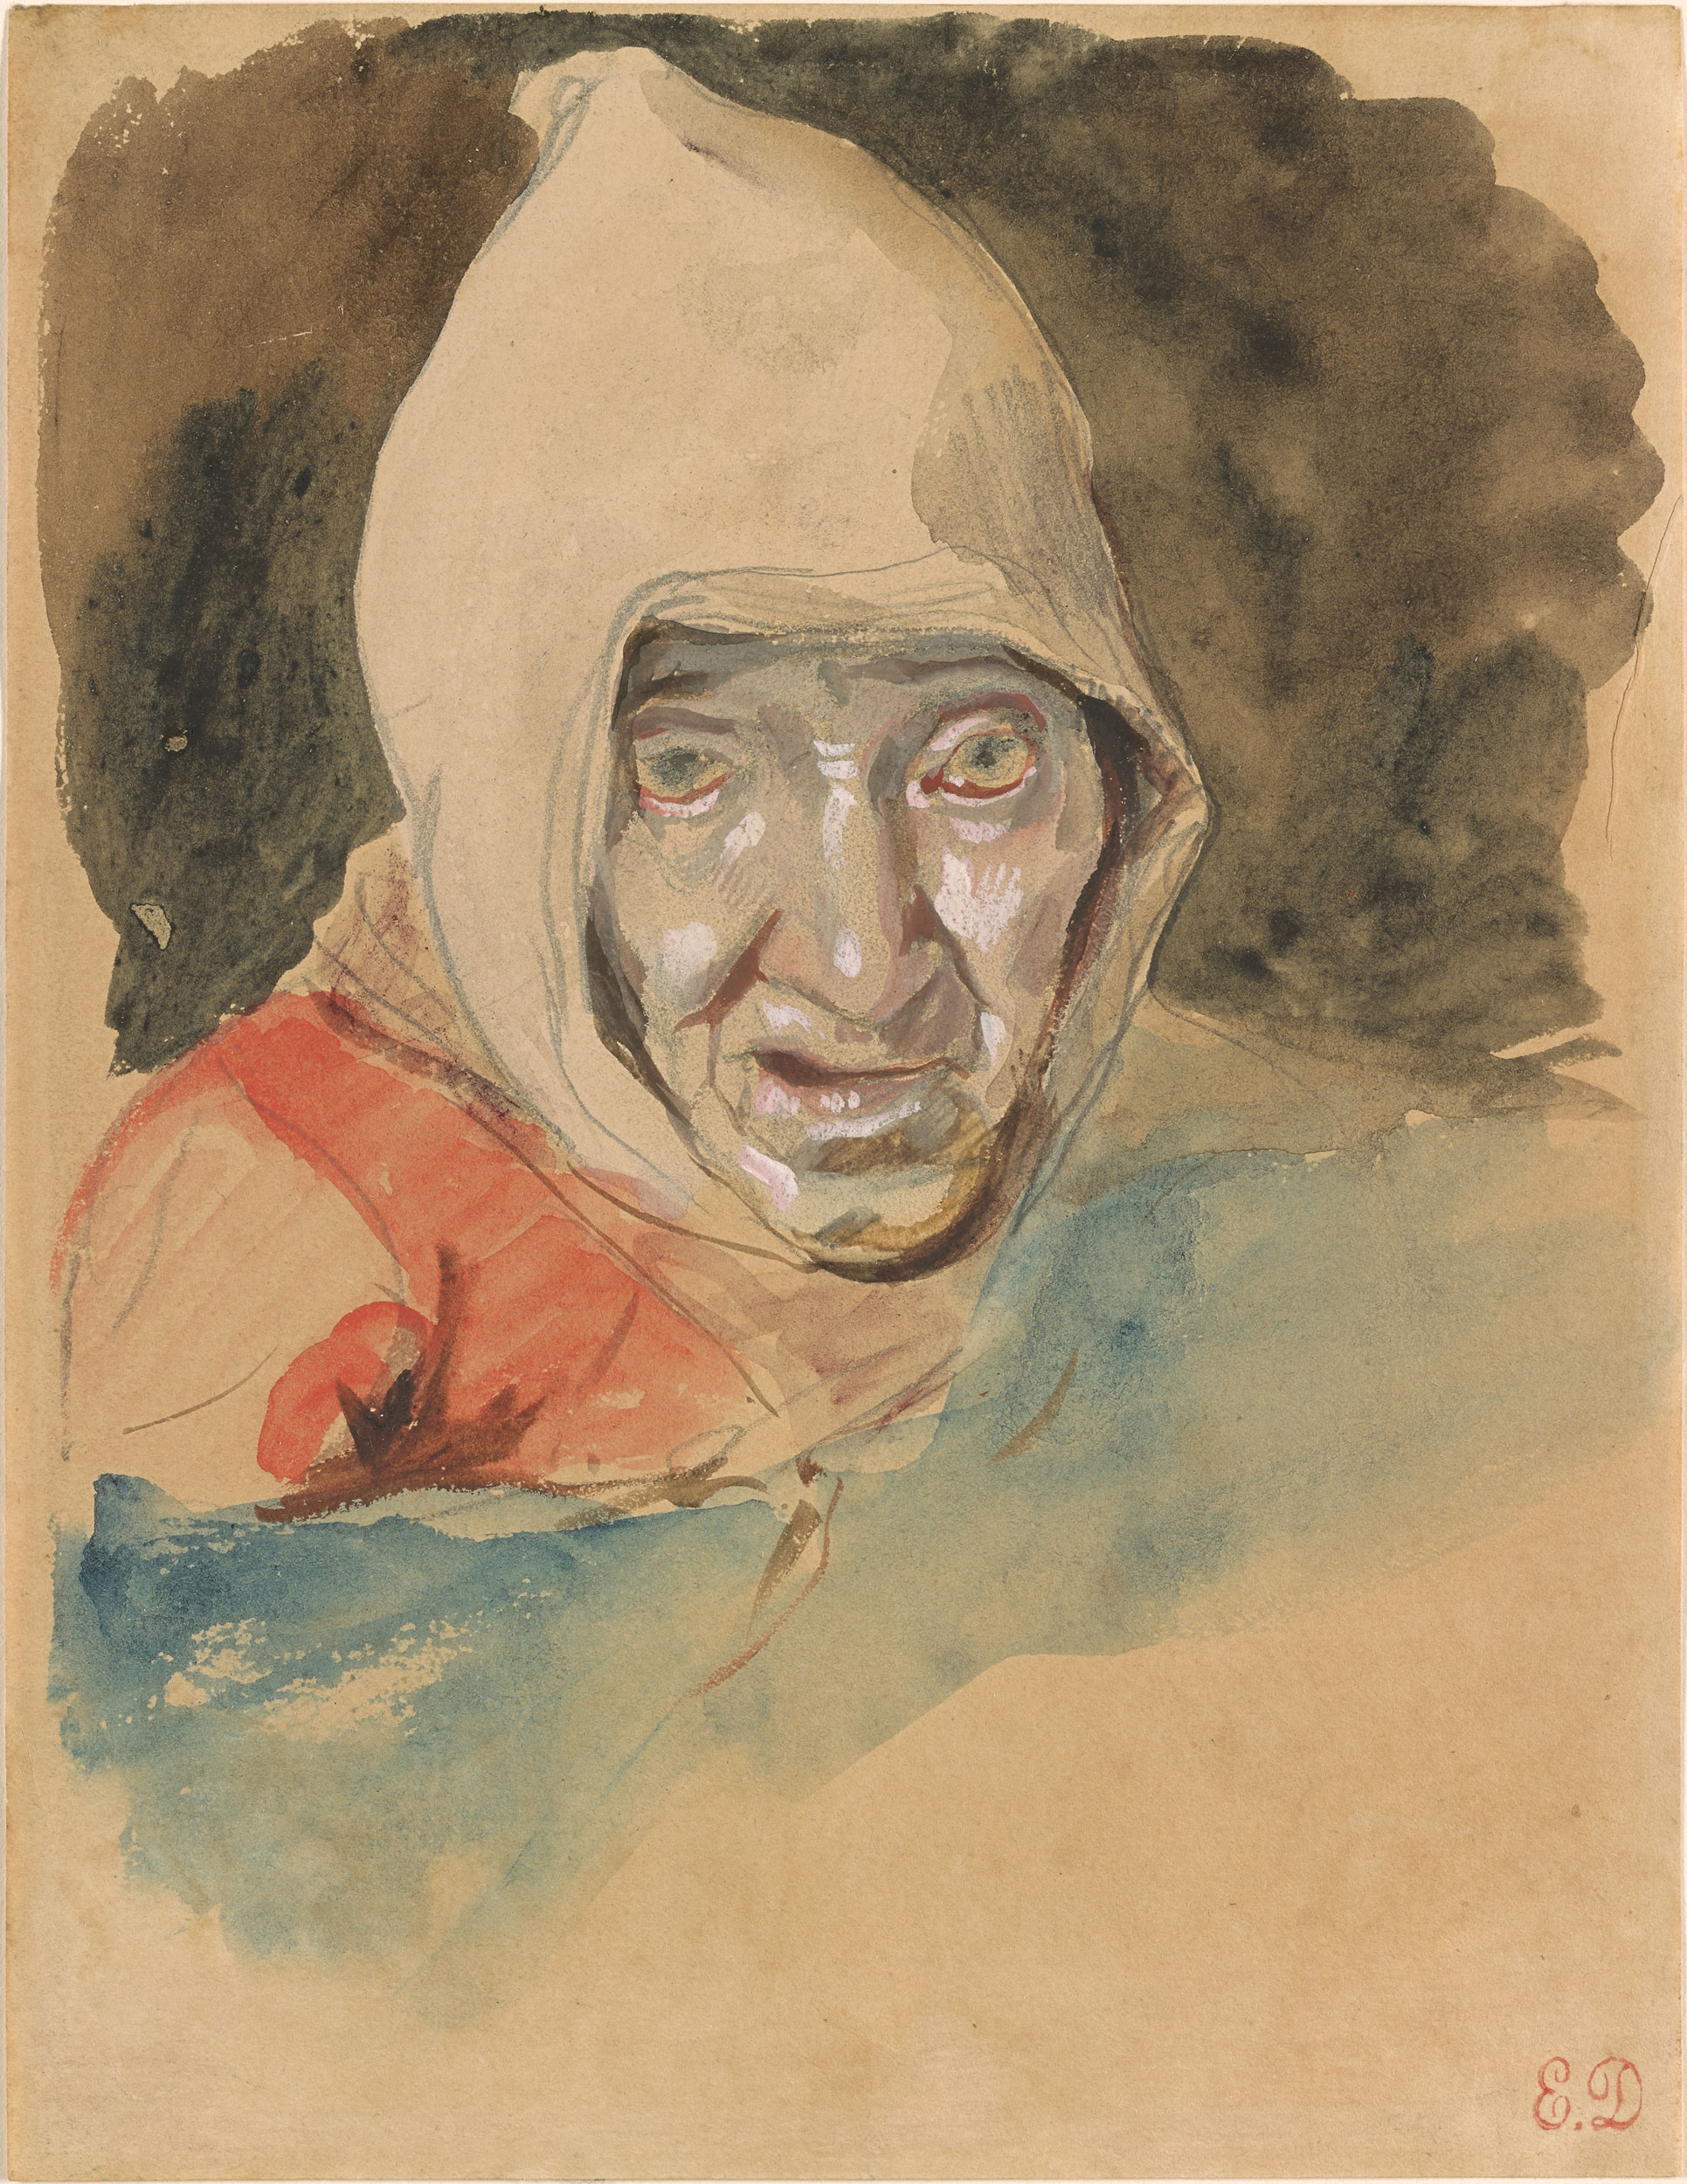 Attributed to Eugène Delacroix | Head of a Woman | Drawings Online | The Morgan Library & Museum